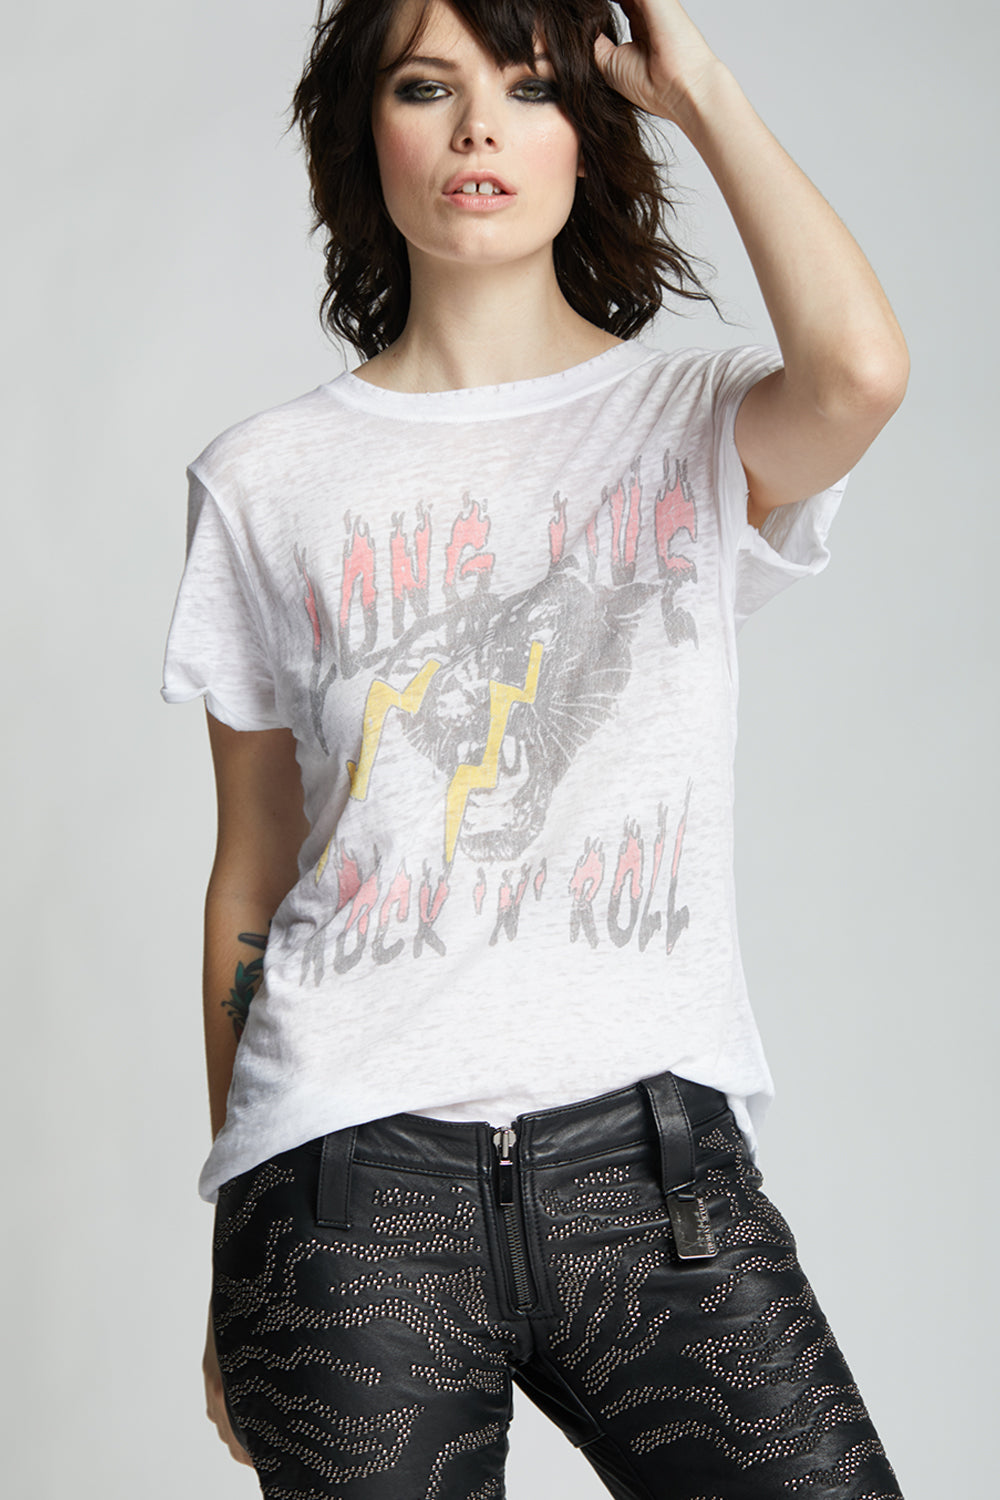 Long Live Rock an' Roll Graphic Tee – chloesprettynpinkboutique